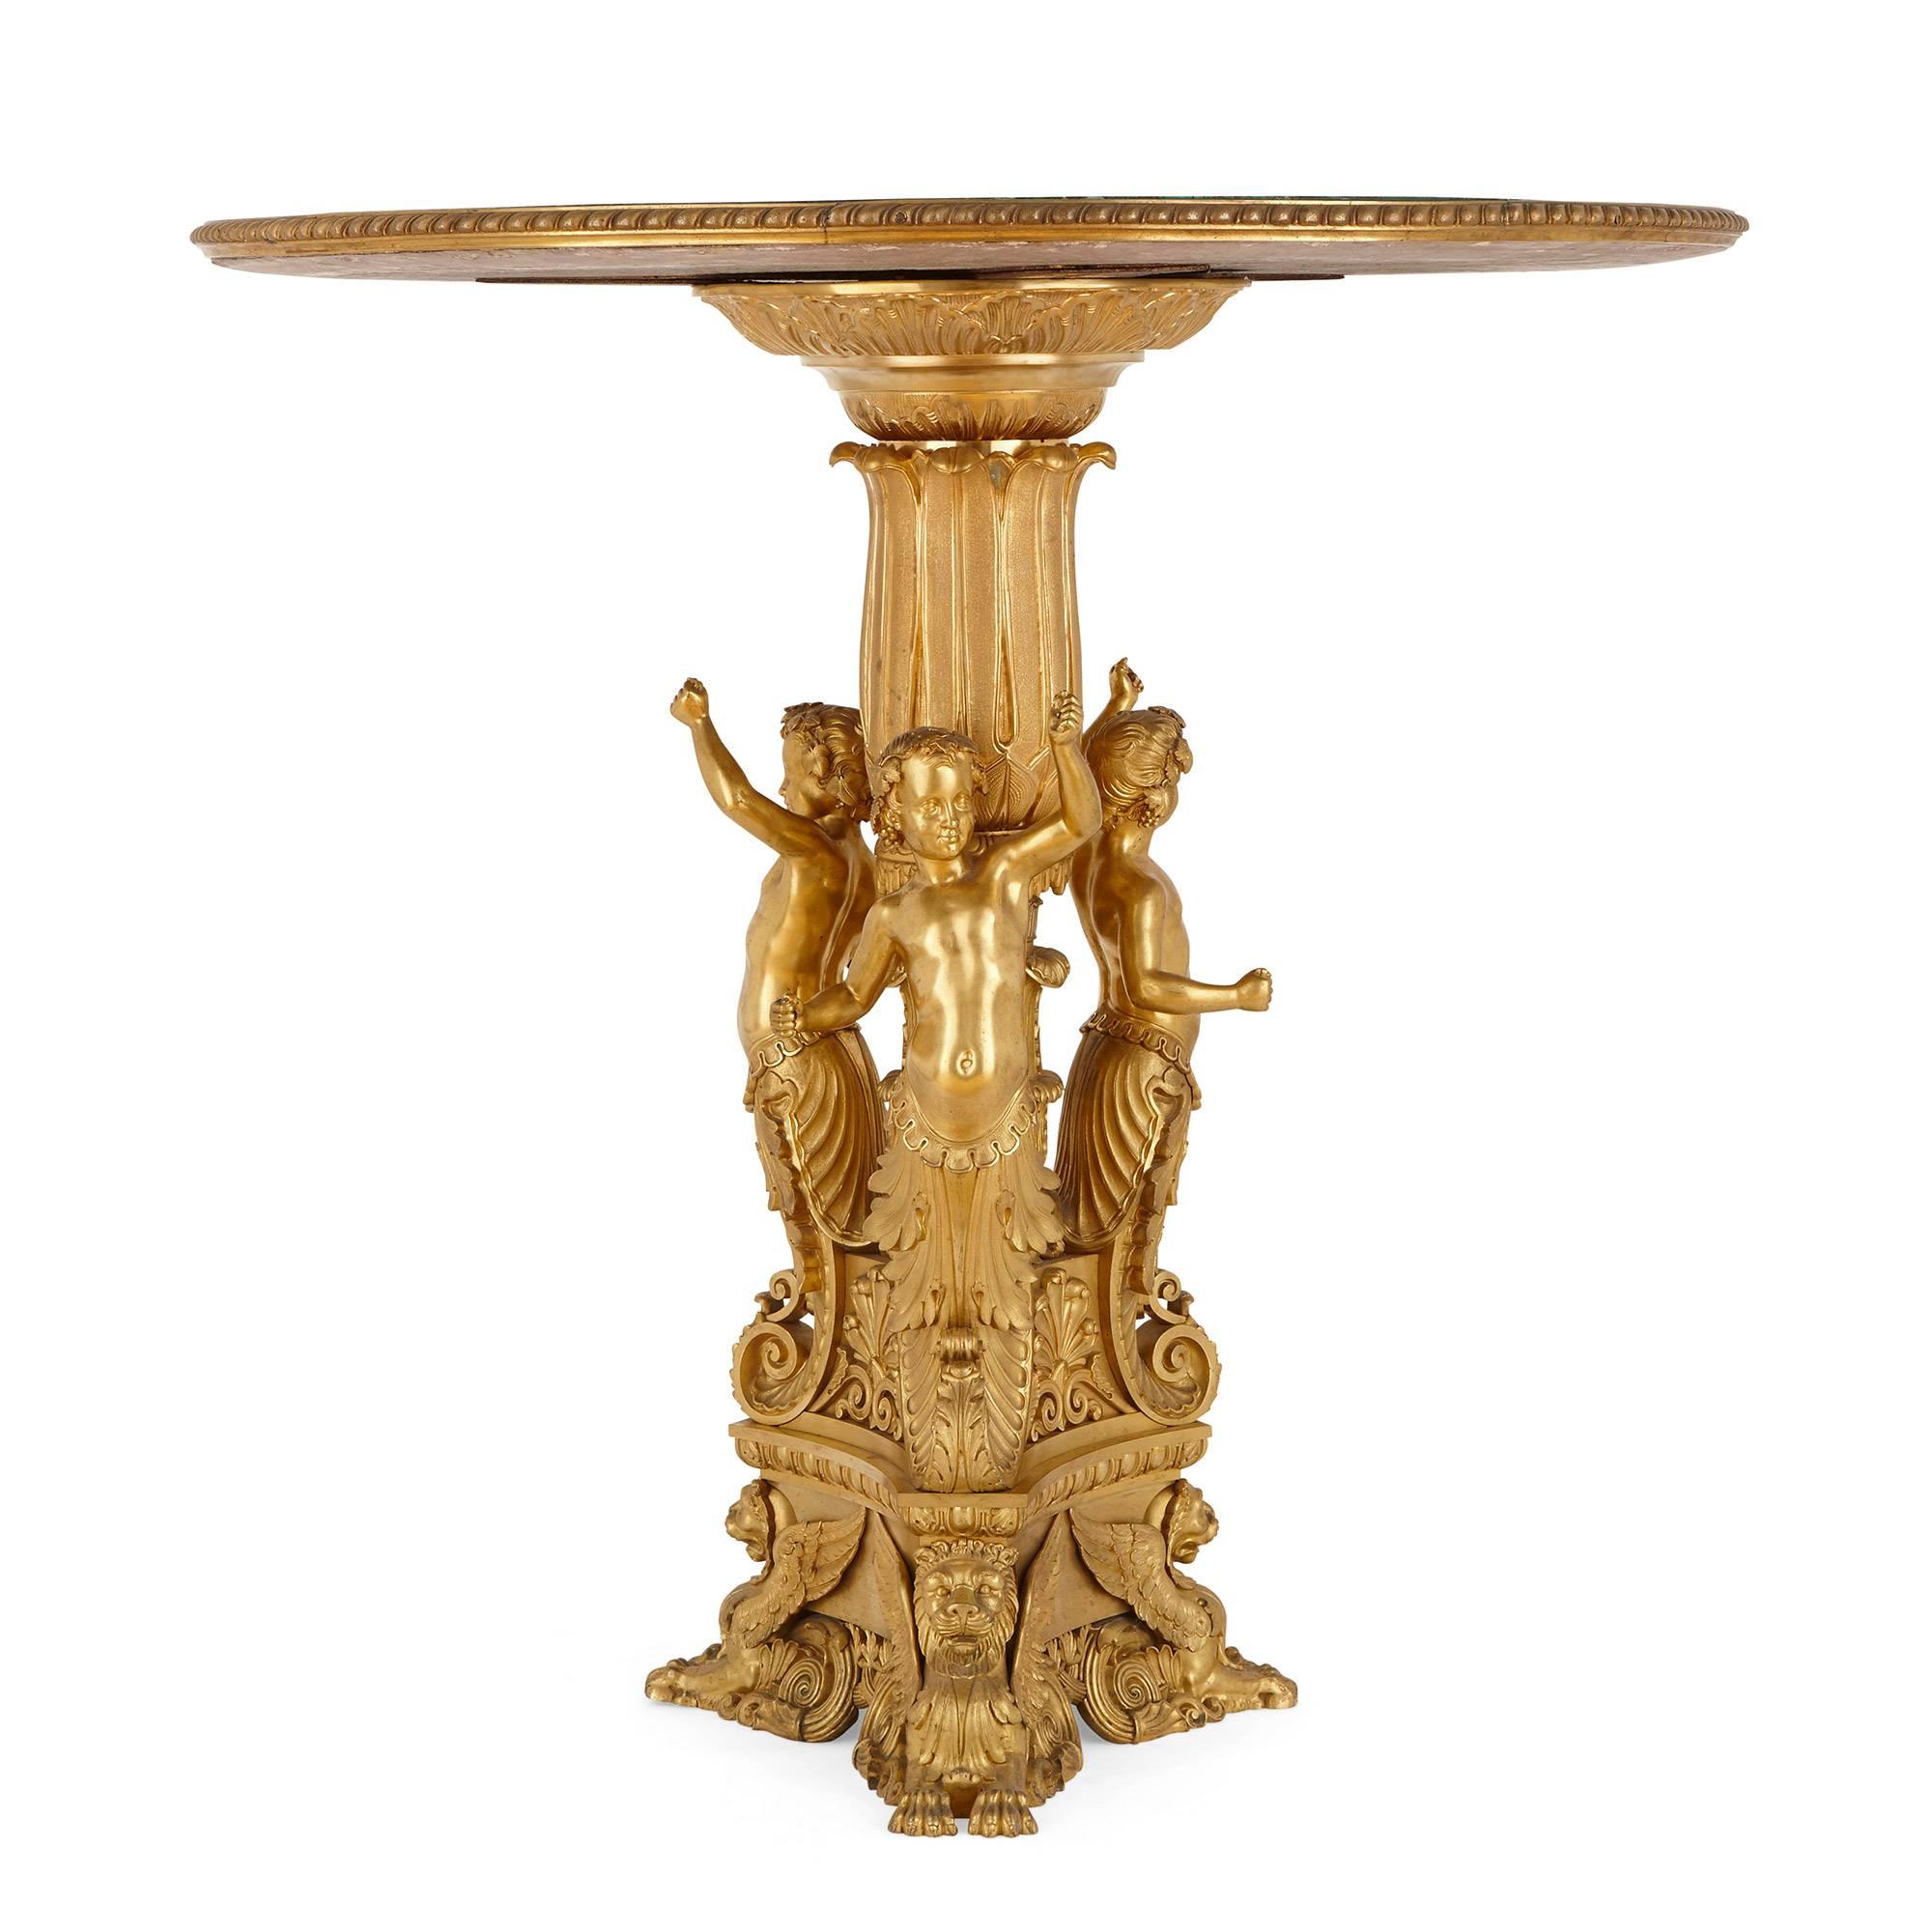 The ormolu base decorated with three half length figures ending in lion head feet, ormolu-mounted circular malachite top.

The fine gold gilt of this Russian table is offset beautifully by its striking green malachite top, making the work a